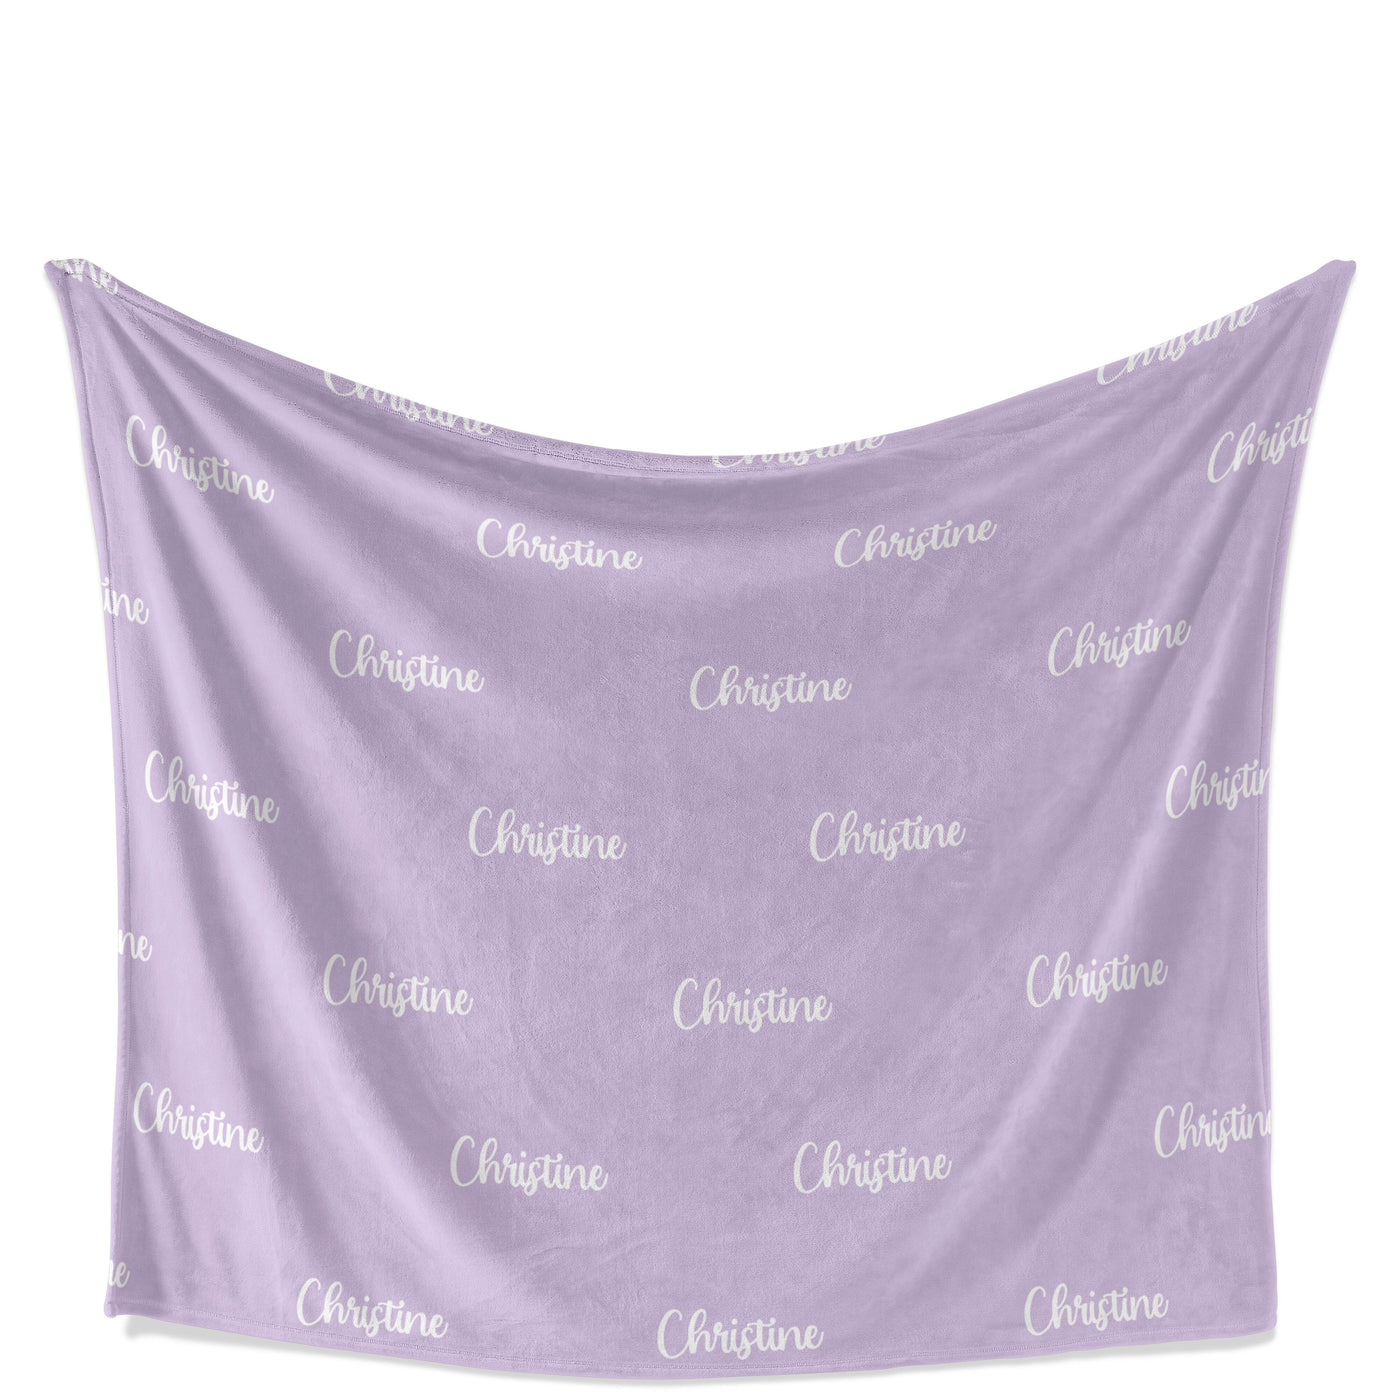 Throw Blanket: Personalized Name and Color throw Blanket Sam + Zoey Lavender Font 1  Sam + Zoey